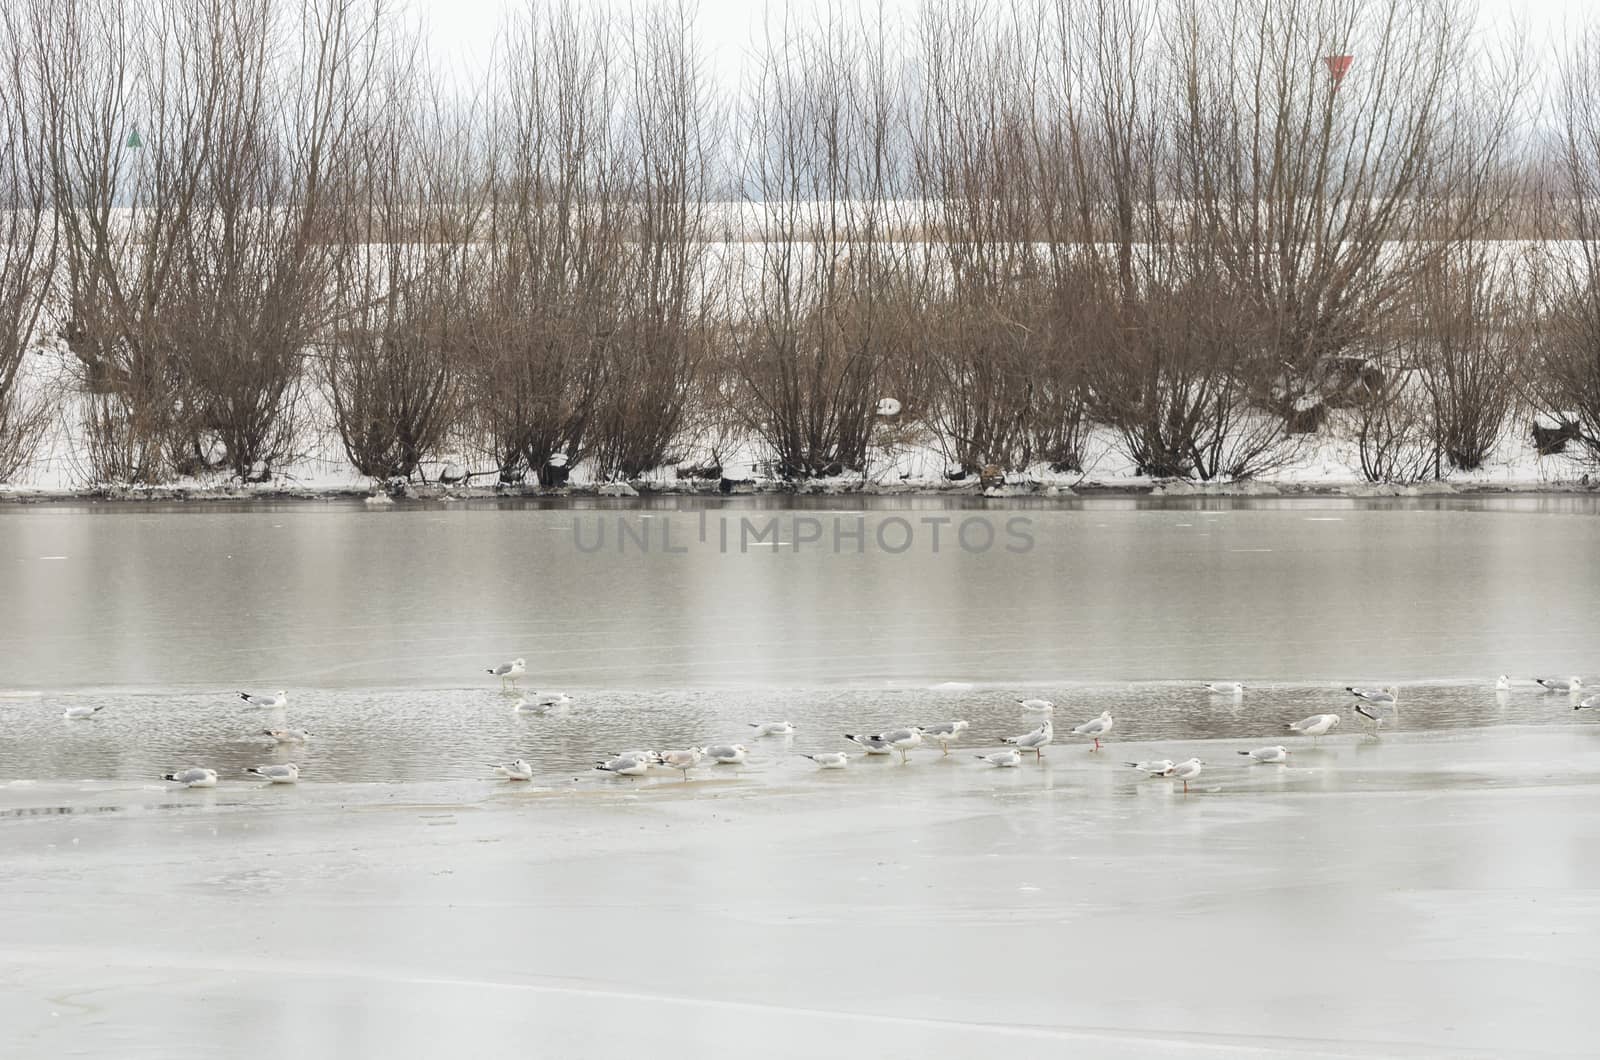 Large group of gulls gathered together on a thawed section of a frozen river